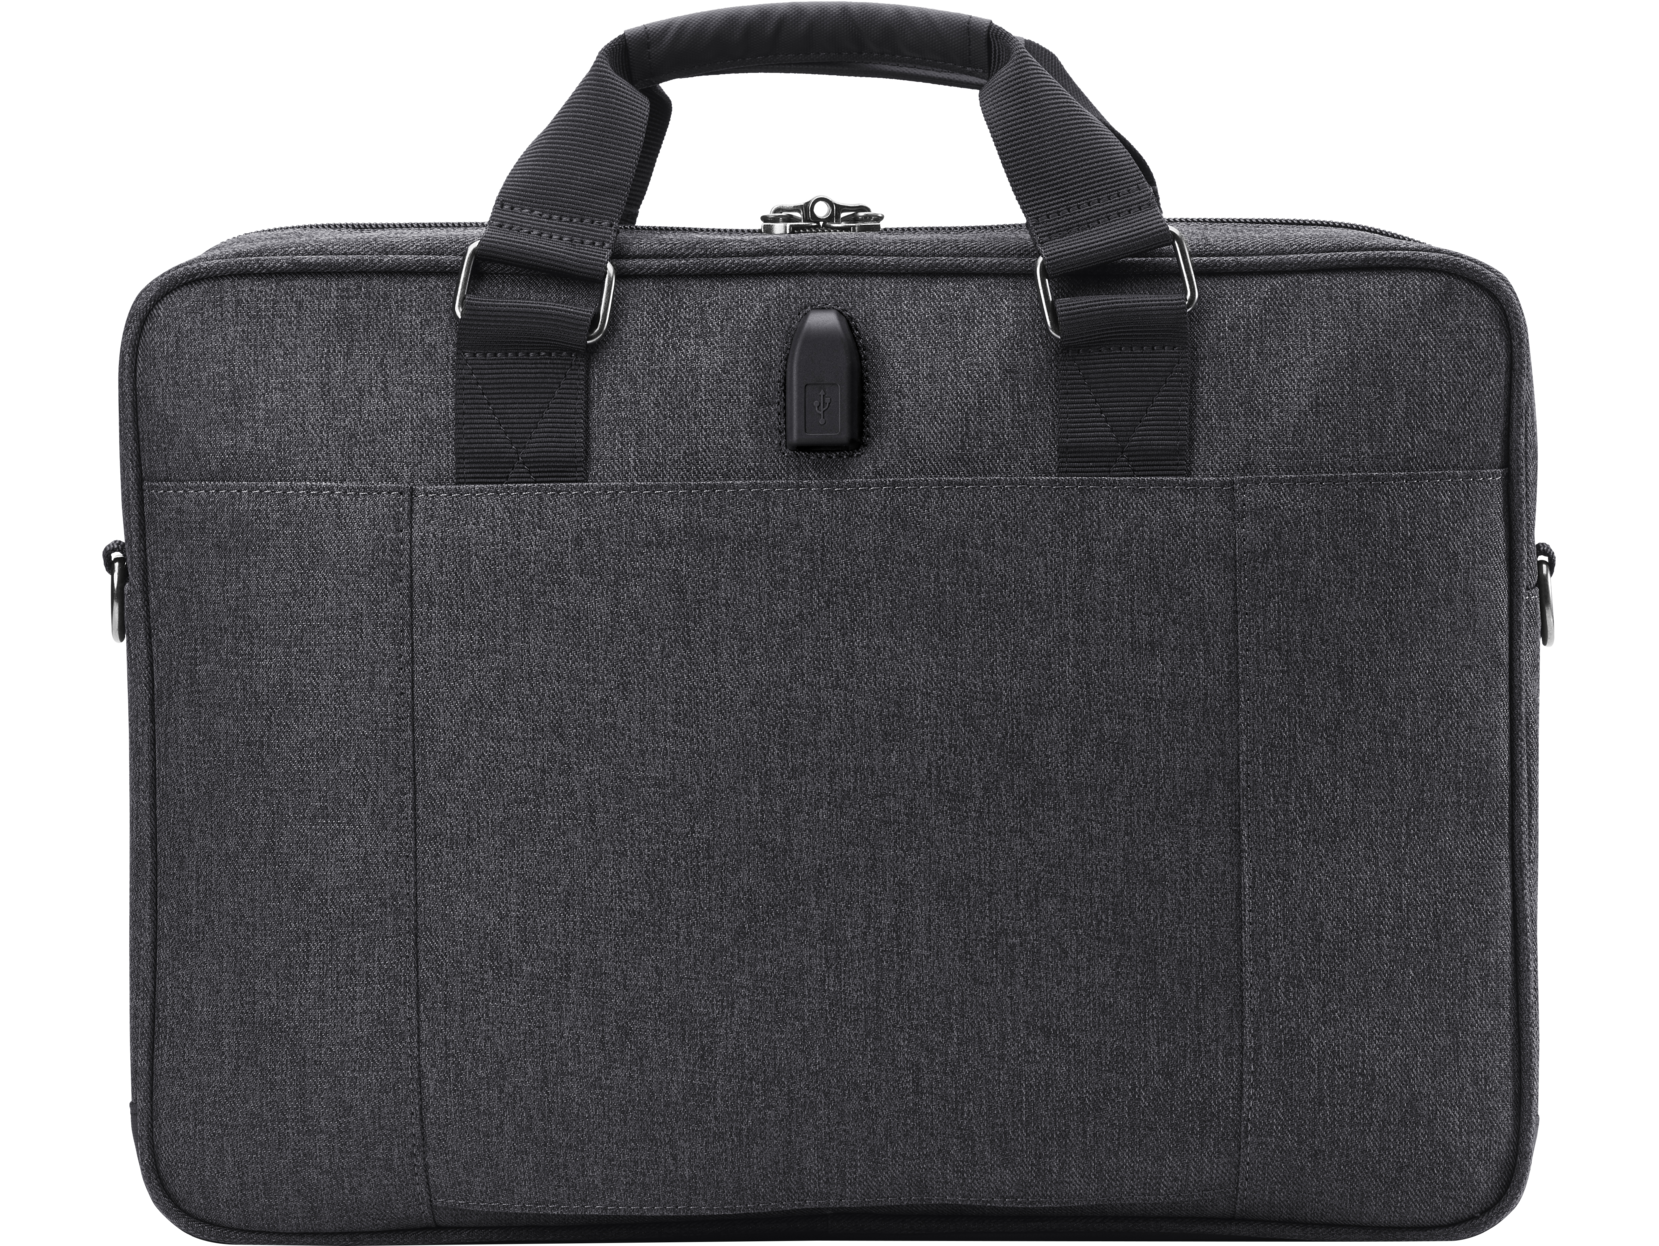 HP Executive Top Load Notebook Case | 15.6" | Gray | 6KD06UT - image 3 of 4